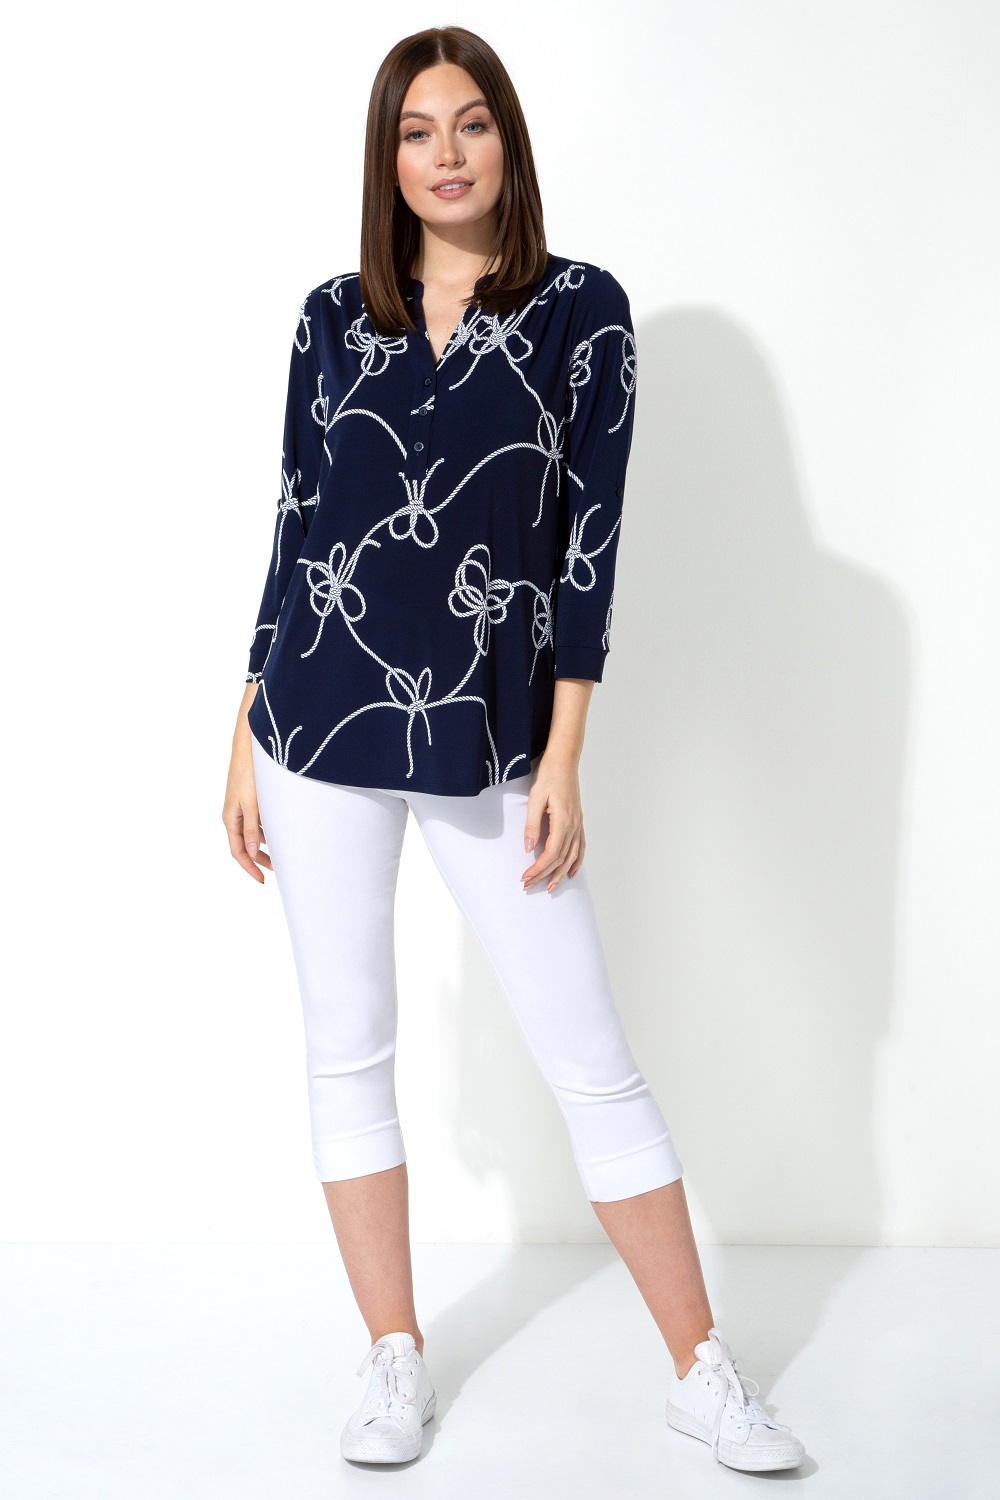 Navy/White Rope Print Button Detail Top, Image 2 of 4